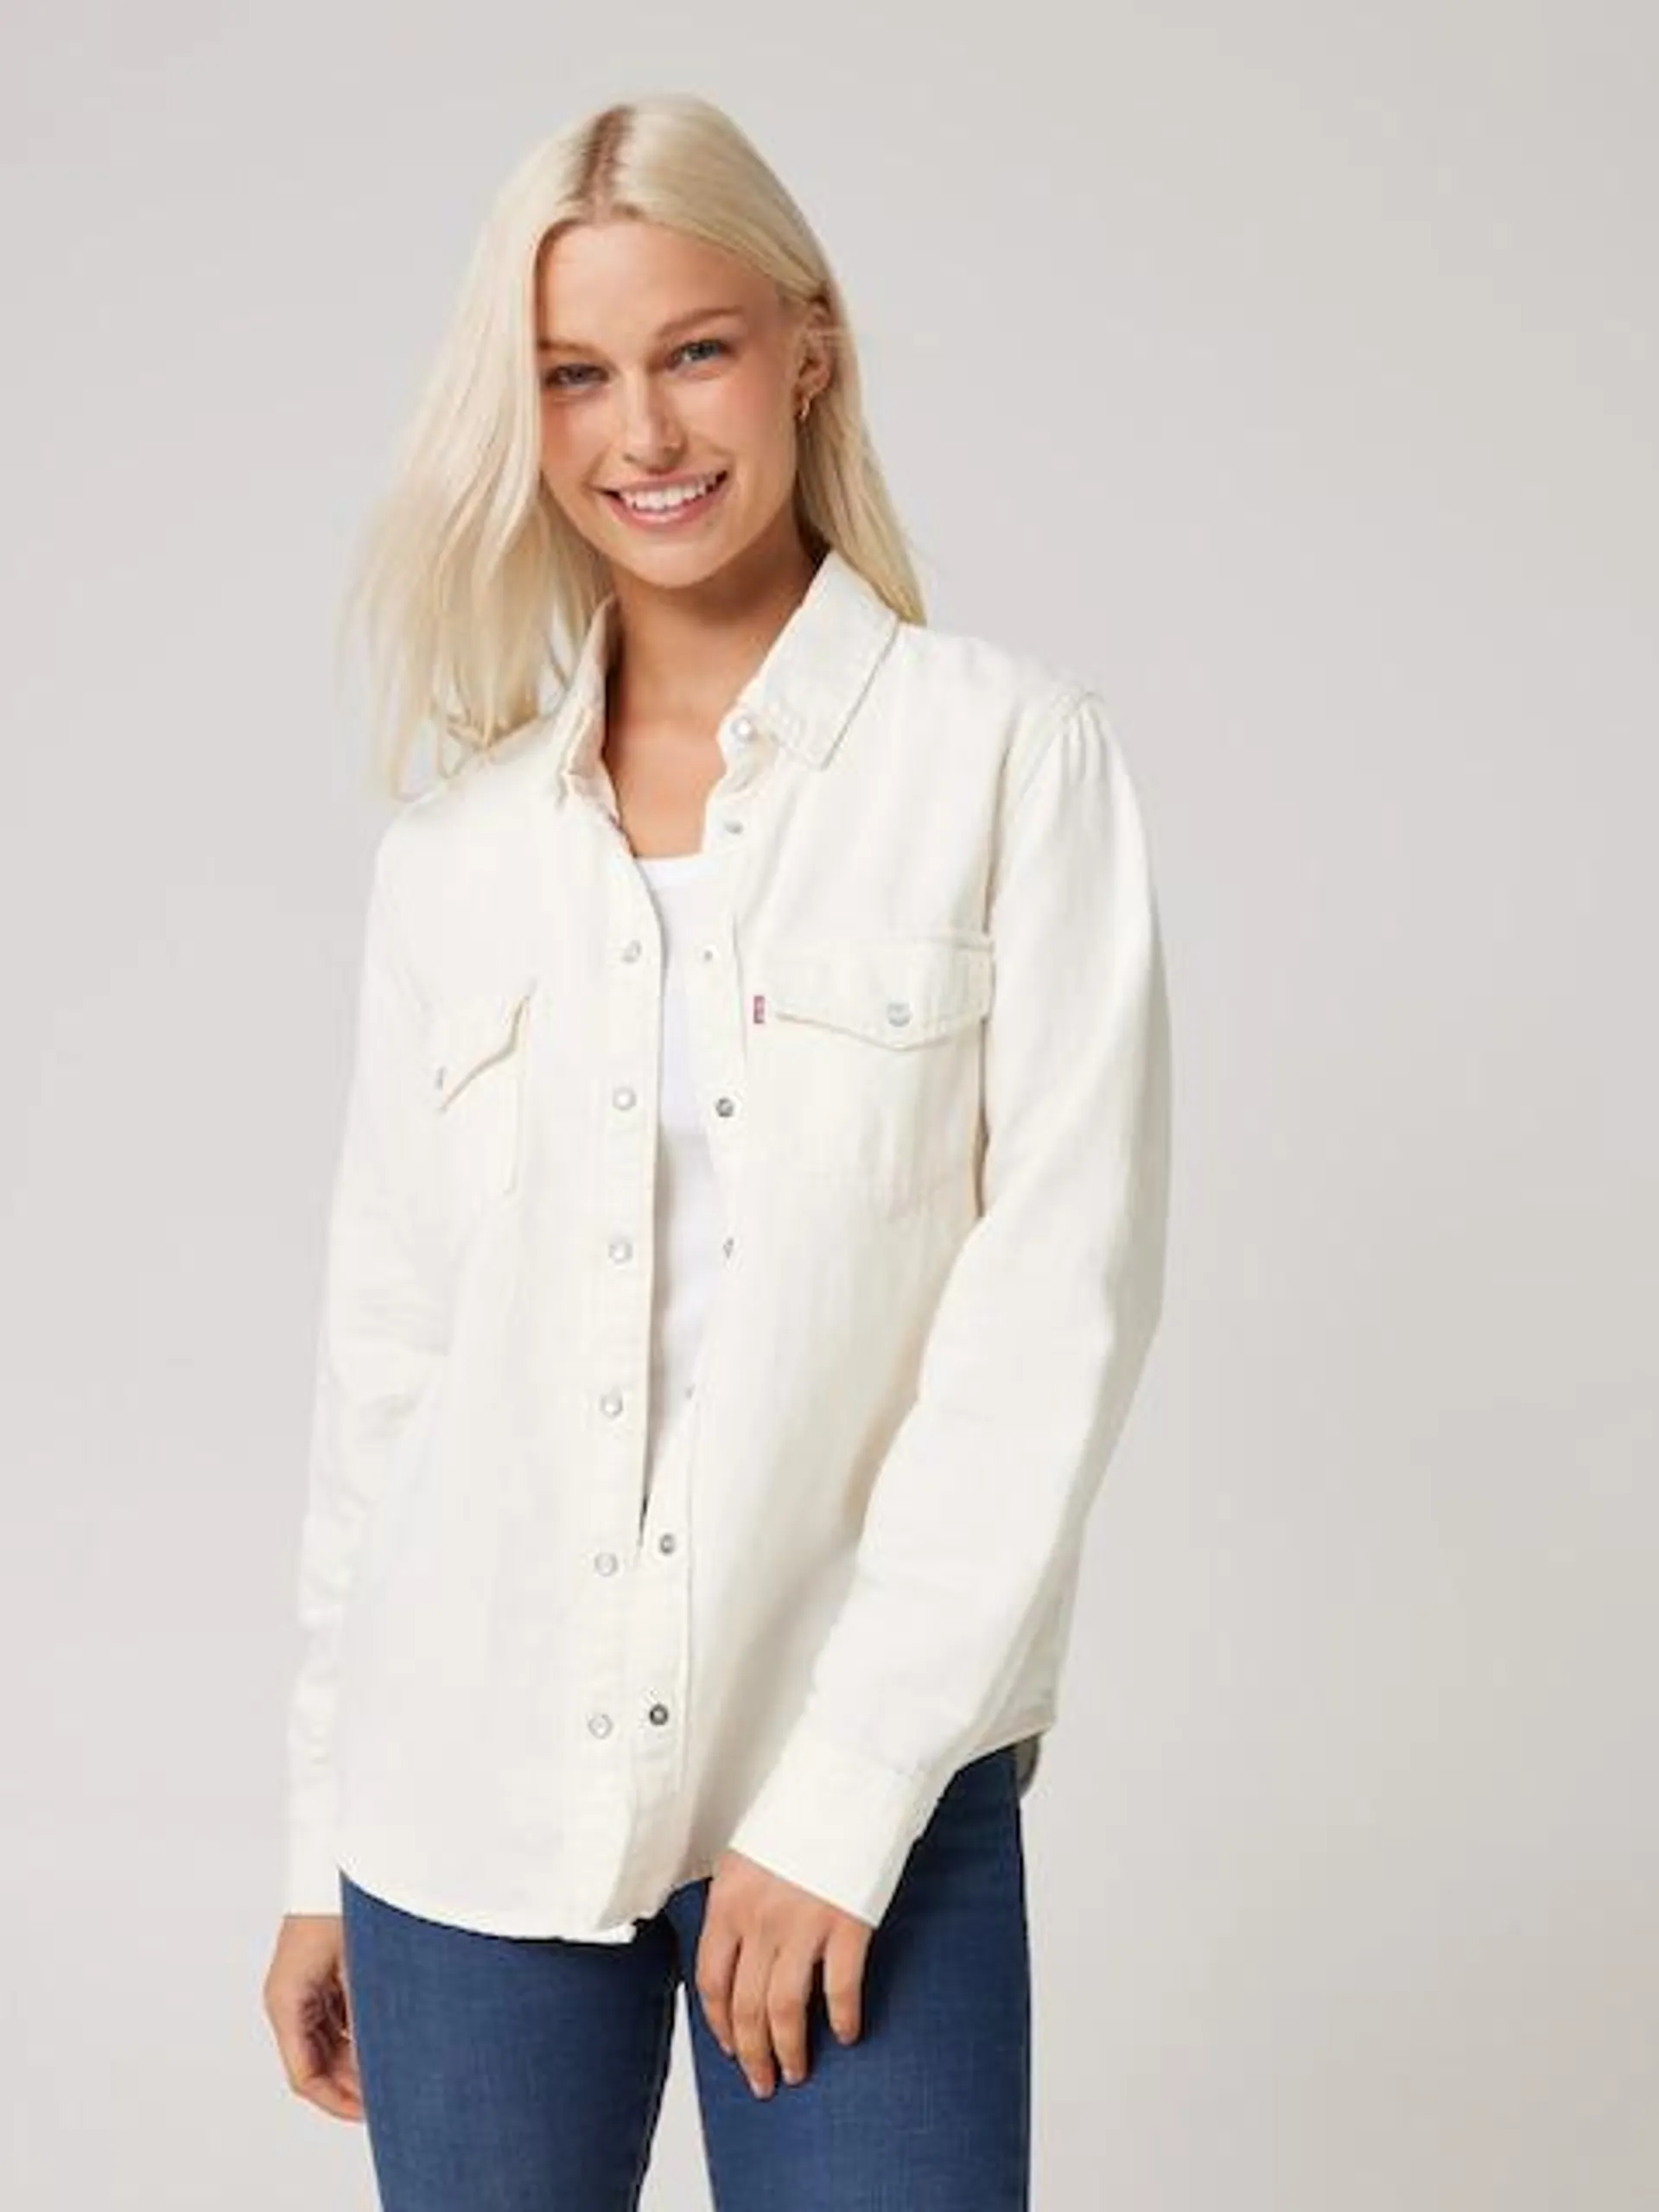 Levi's Iconic Western Shirt In Tan Rinse